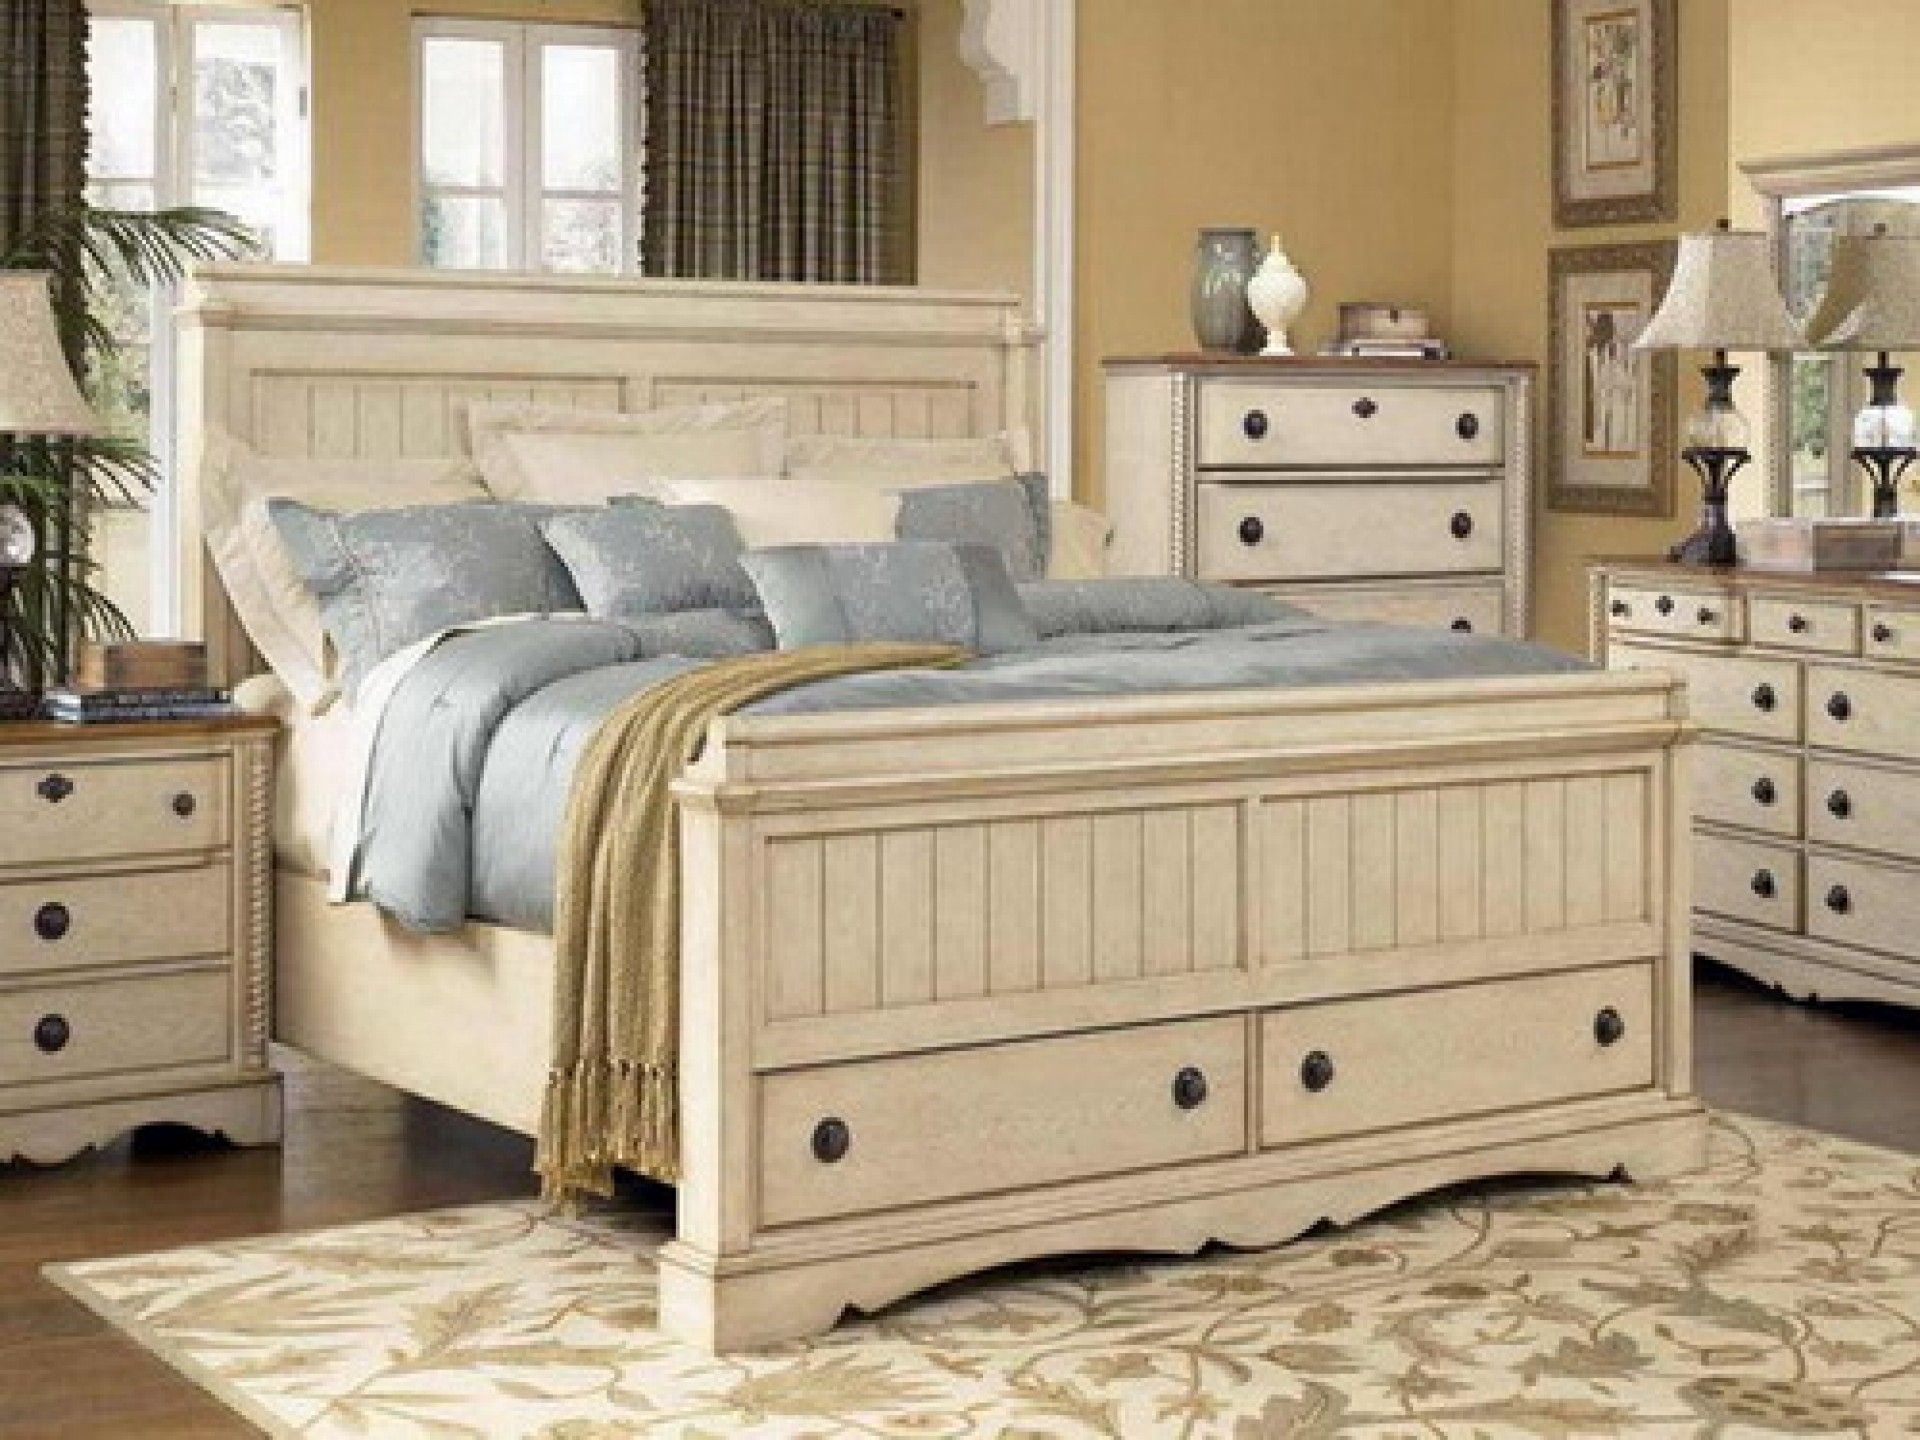 Distressed White Queen Bedroom Set White Bedroom Design Throughout pertaining to dimensions 1920 X 1440